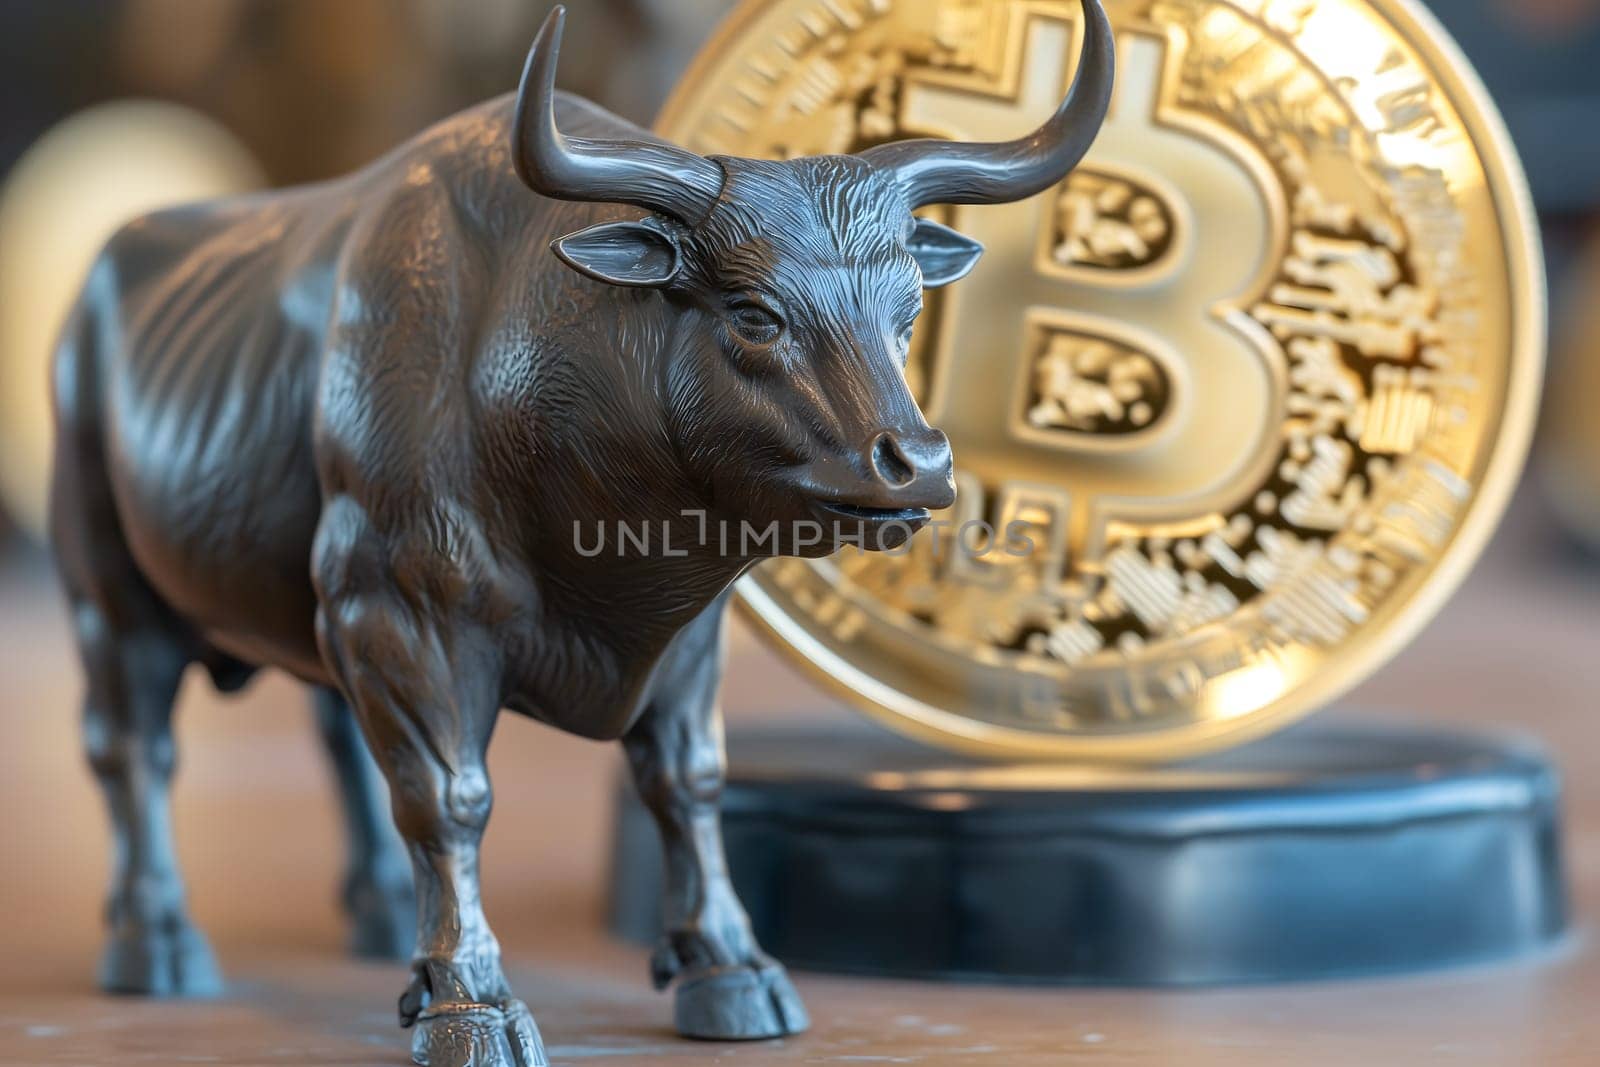 Bull with bitcoin. Bullish trend concept. Neural network generated image. Not based on any actual person or scene.